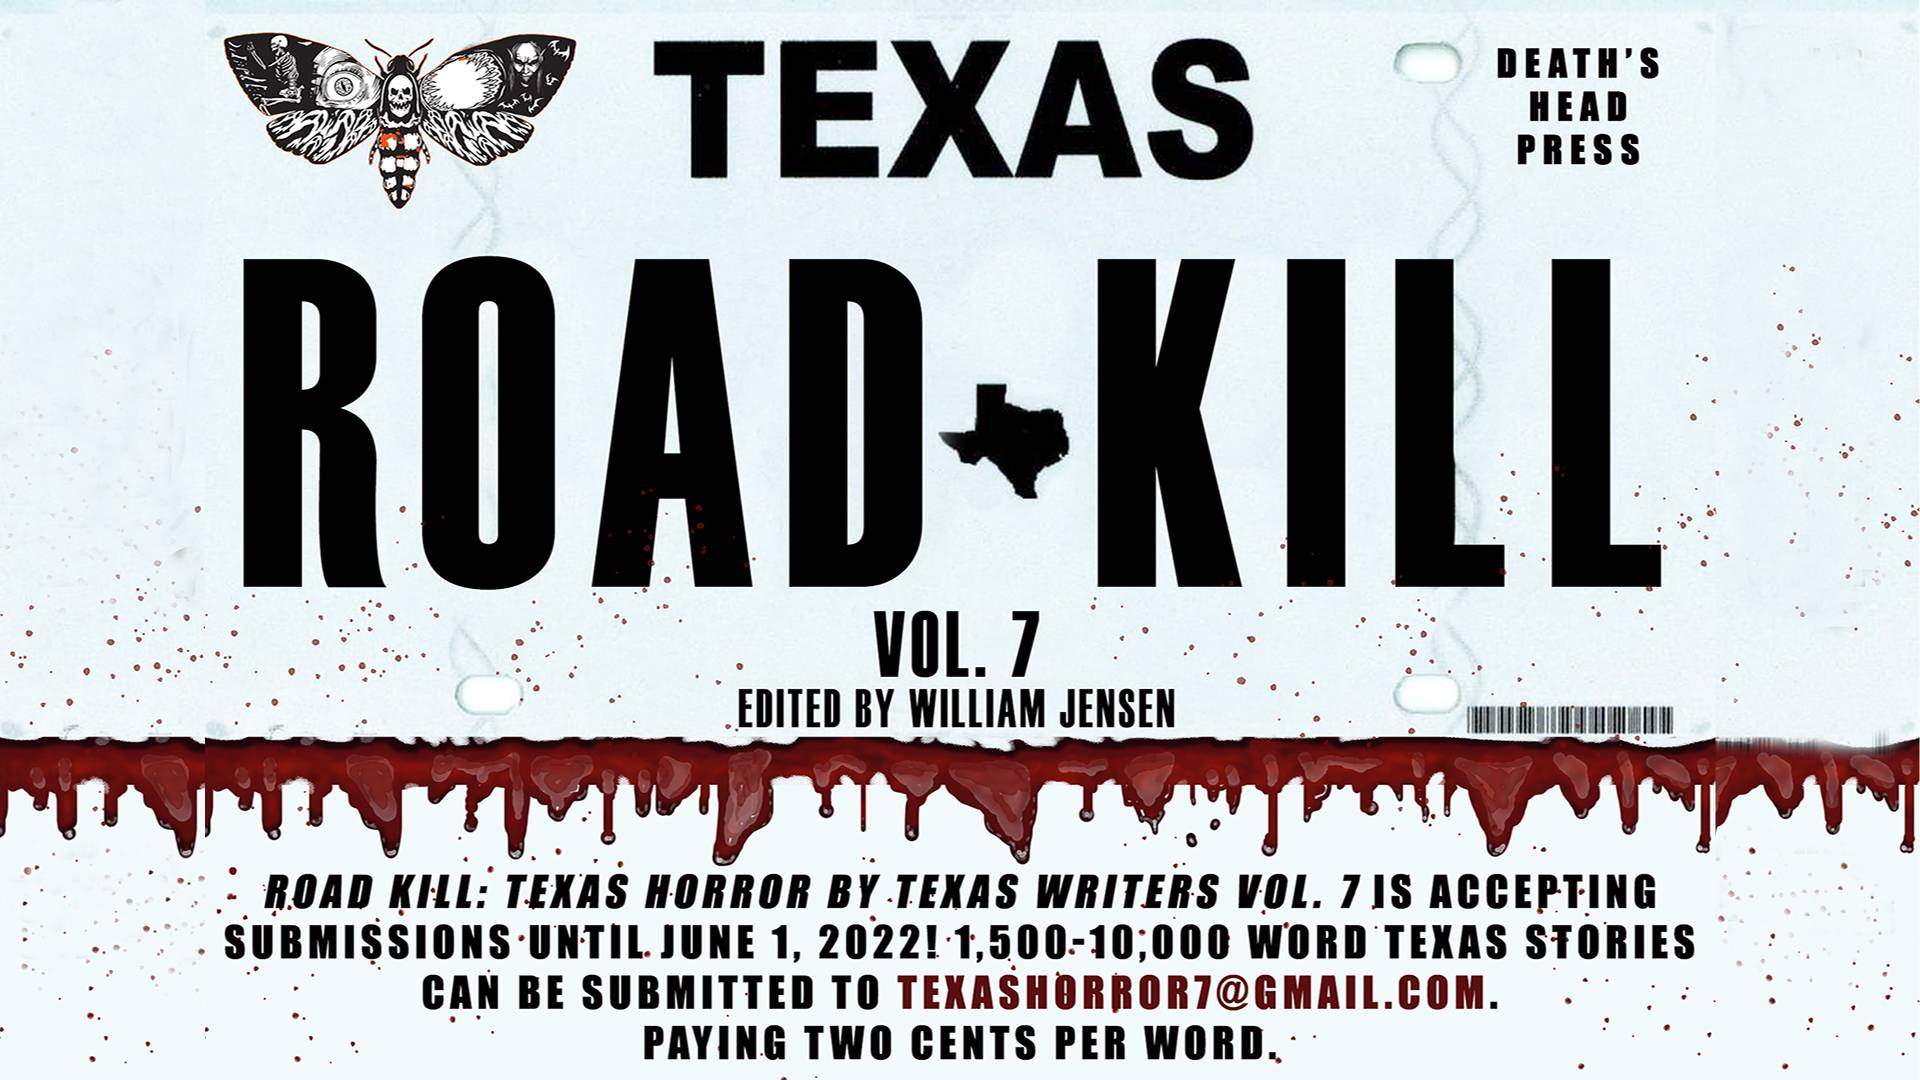 Texas Road Kill Submissions